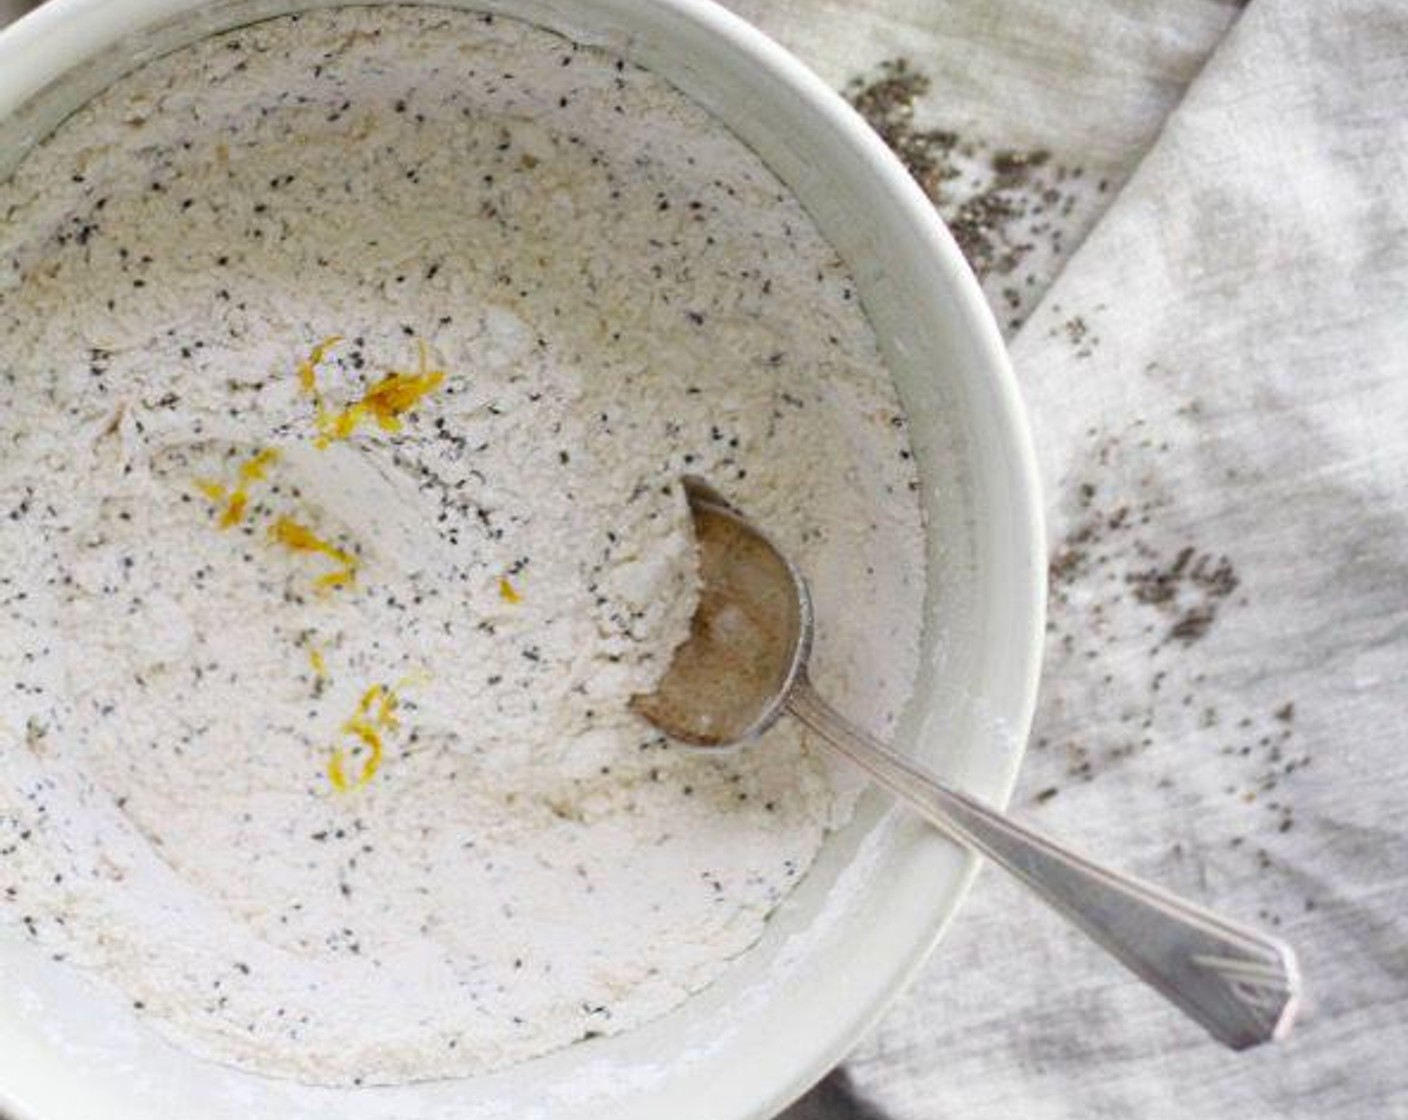 step 2 In a large bowl, combine the All-Purpose Flour (1 3/4 cups), Granulated Sugar (1/2 cup), Chia Seeds (3 Tbsp), zest from Lemon (1), Baking Powder (1 tsp), Baking Soda (1 tsp), and Salt (1/2 tsp).